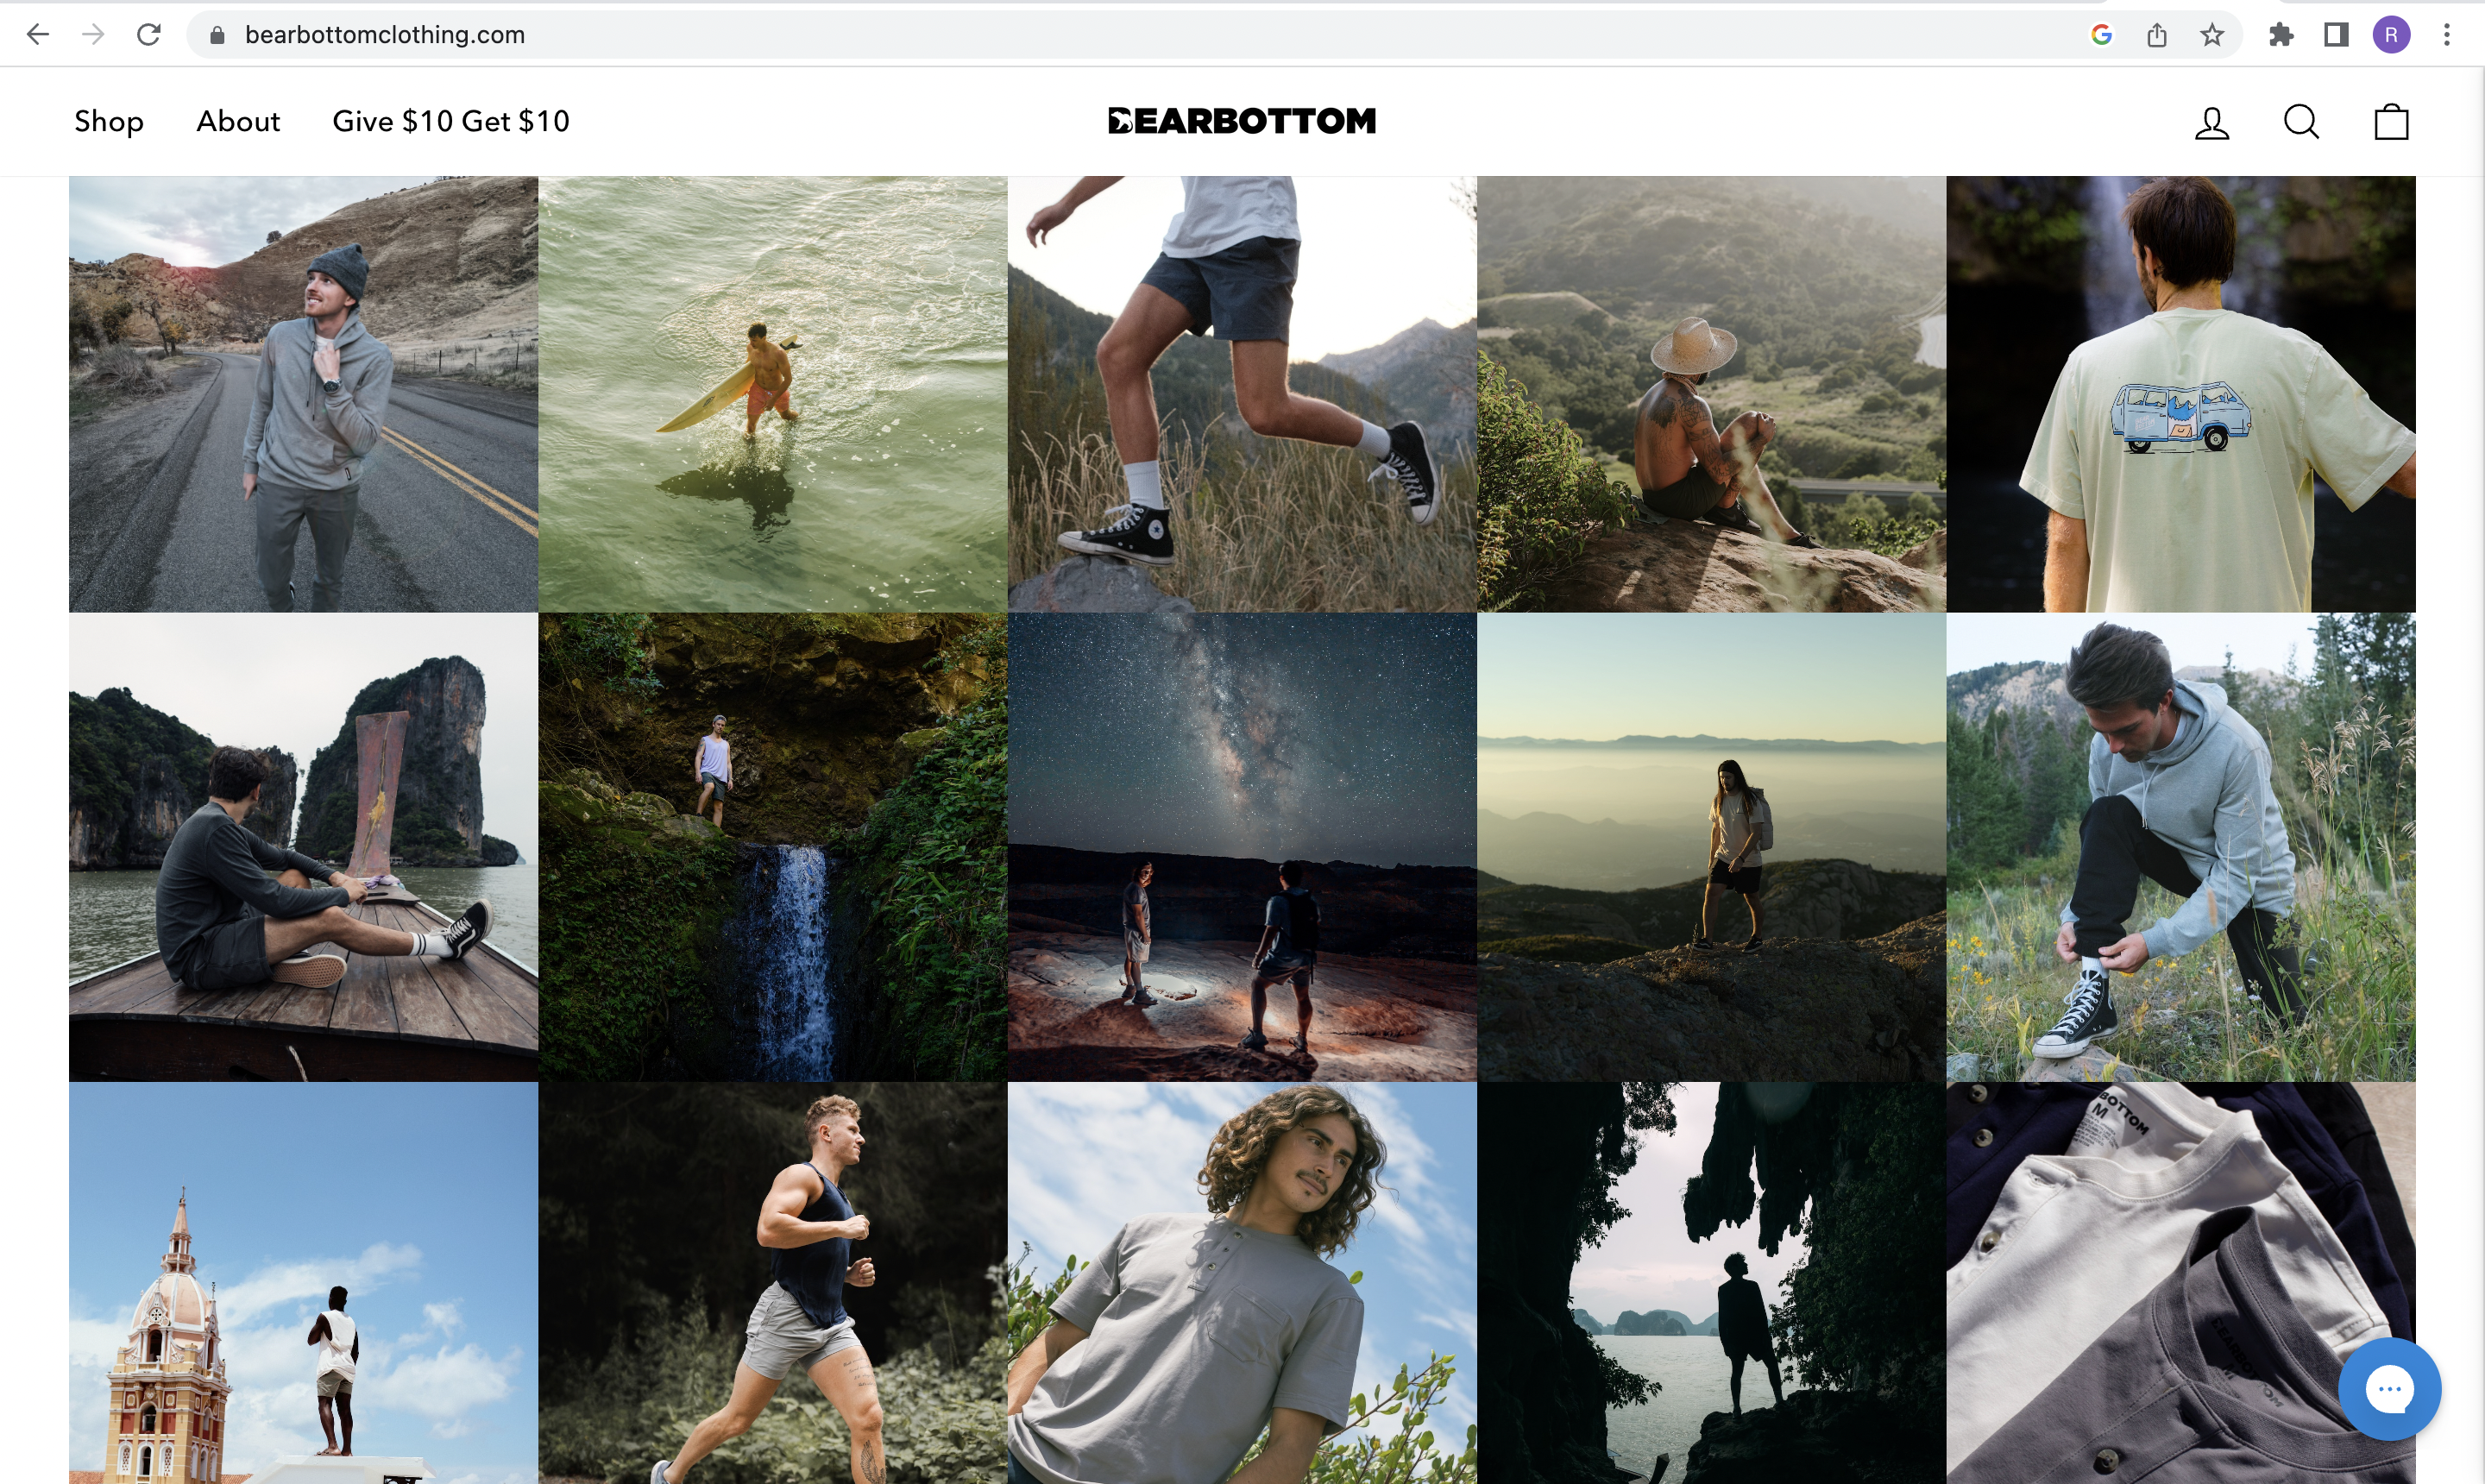 Bearbottom Clothing Lifts Revenue by 22% with AI/ML-powered personalized shopping experiences